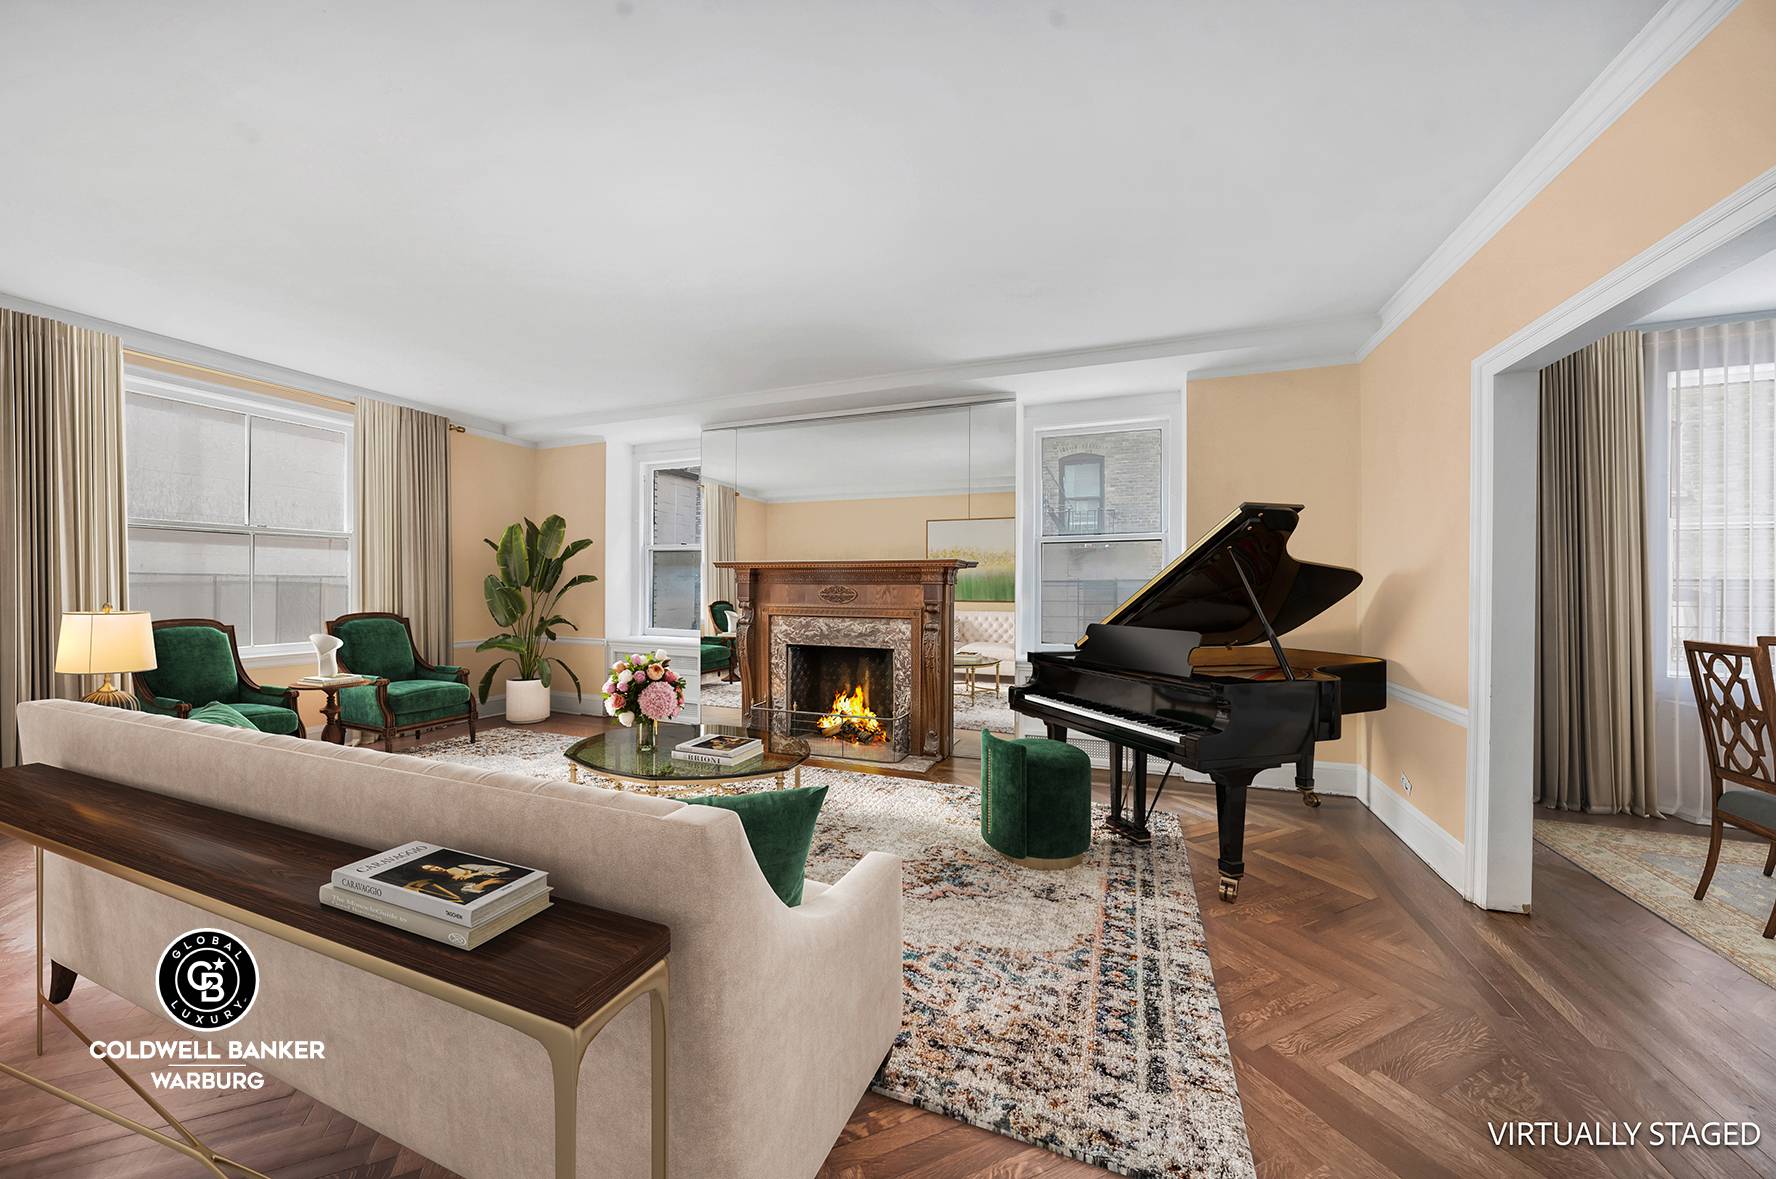 Unique opportunity to purchase a classic 8 room duplex in original condition at 1165 Fifth Avenue, just steps to Central Park.